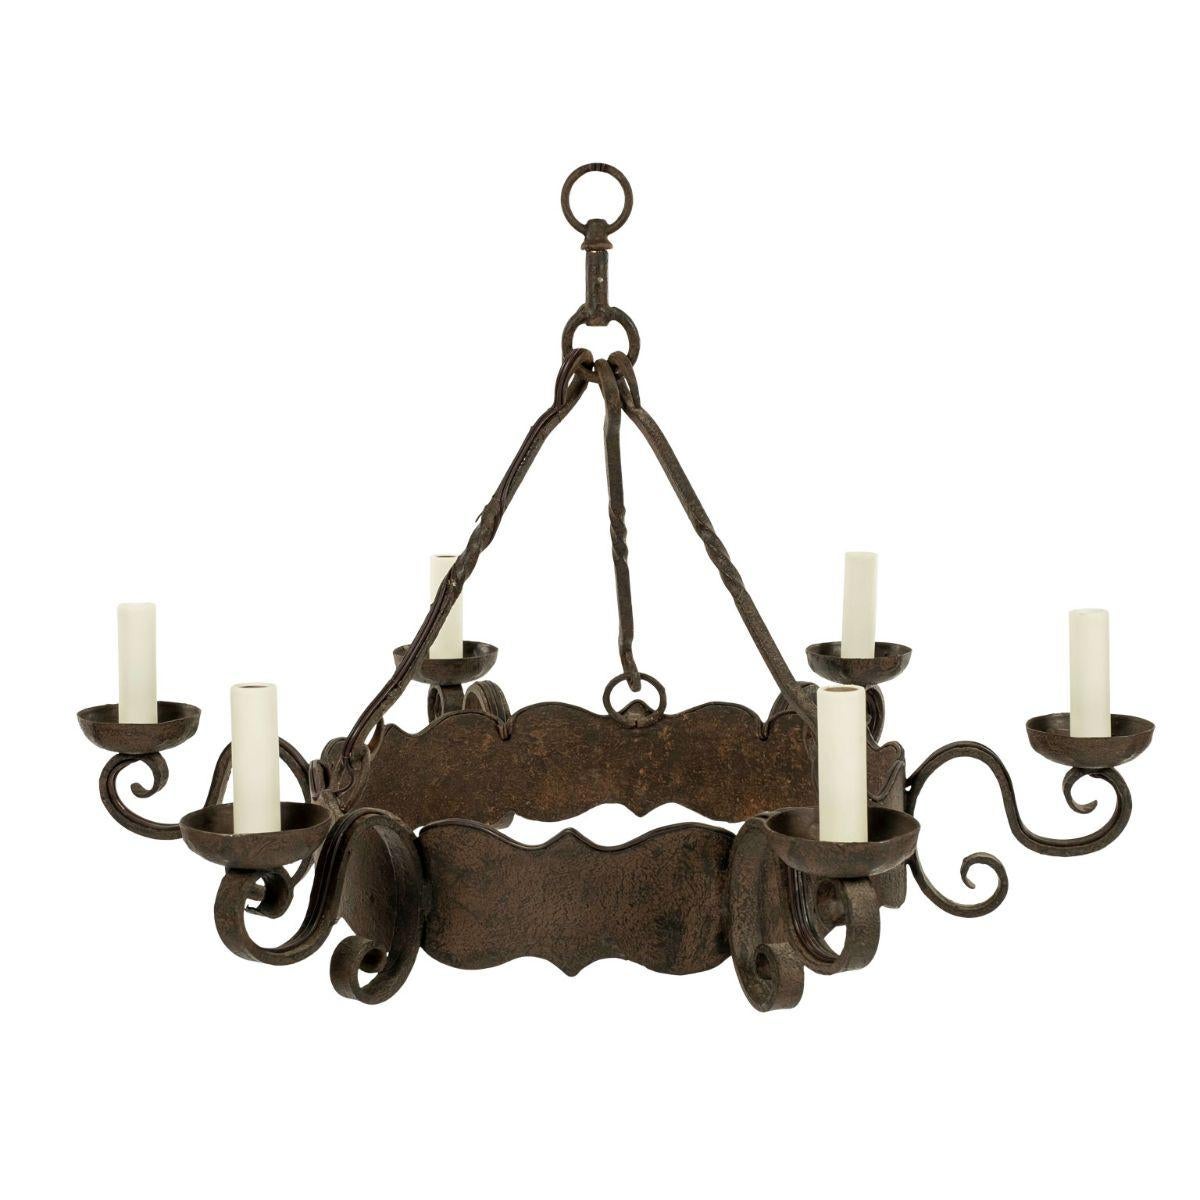 Round heavy iron chandelier dating to the late 19th or early 20th century. Decorative round scalloped band iron chandelier with six scrolled arms. Newly wired for use within the USA using UL listed parts. Includes chain and canopy. Height measured